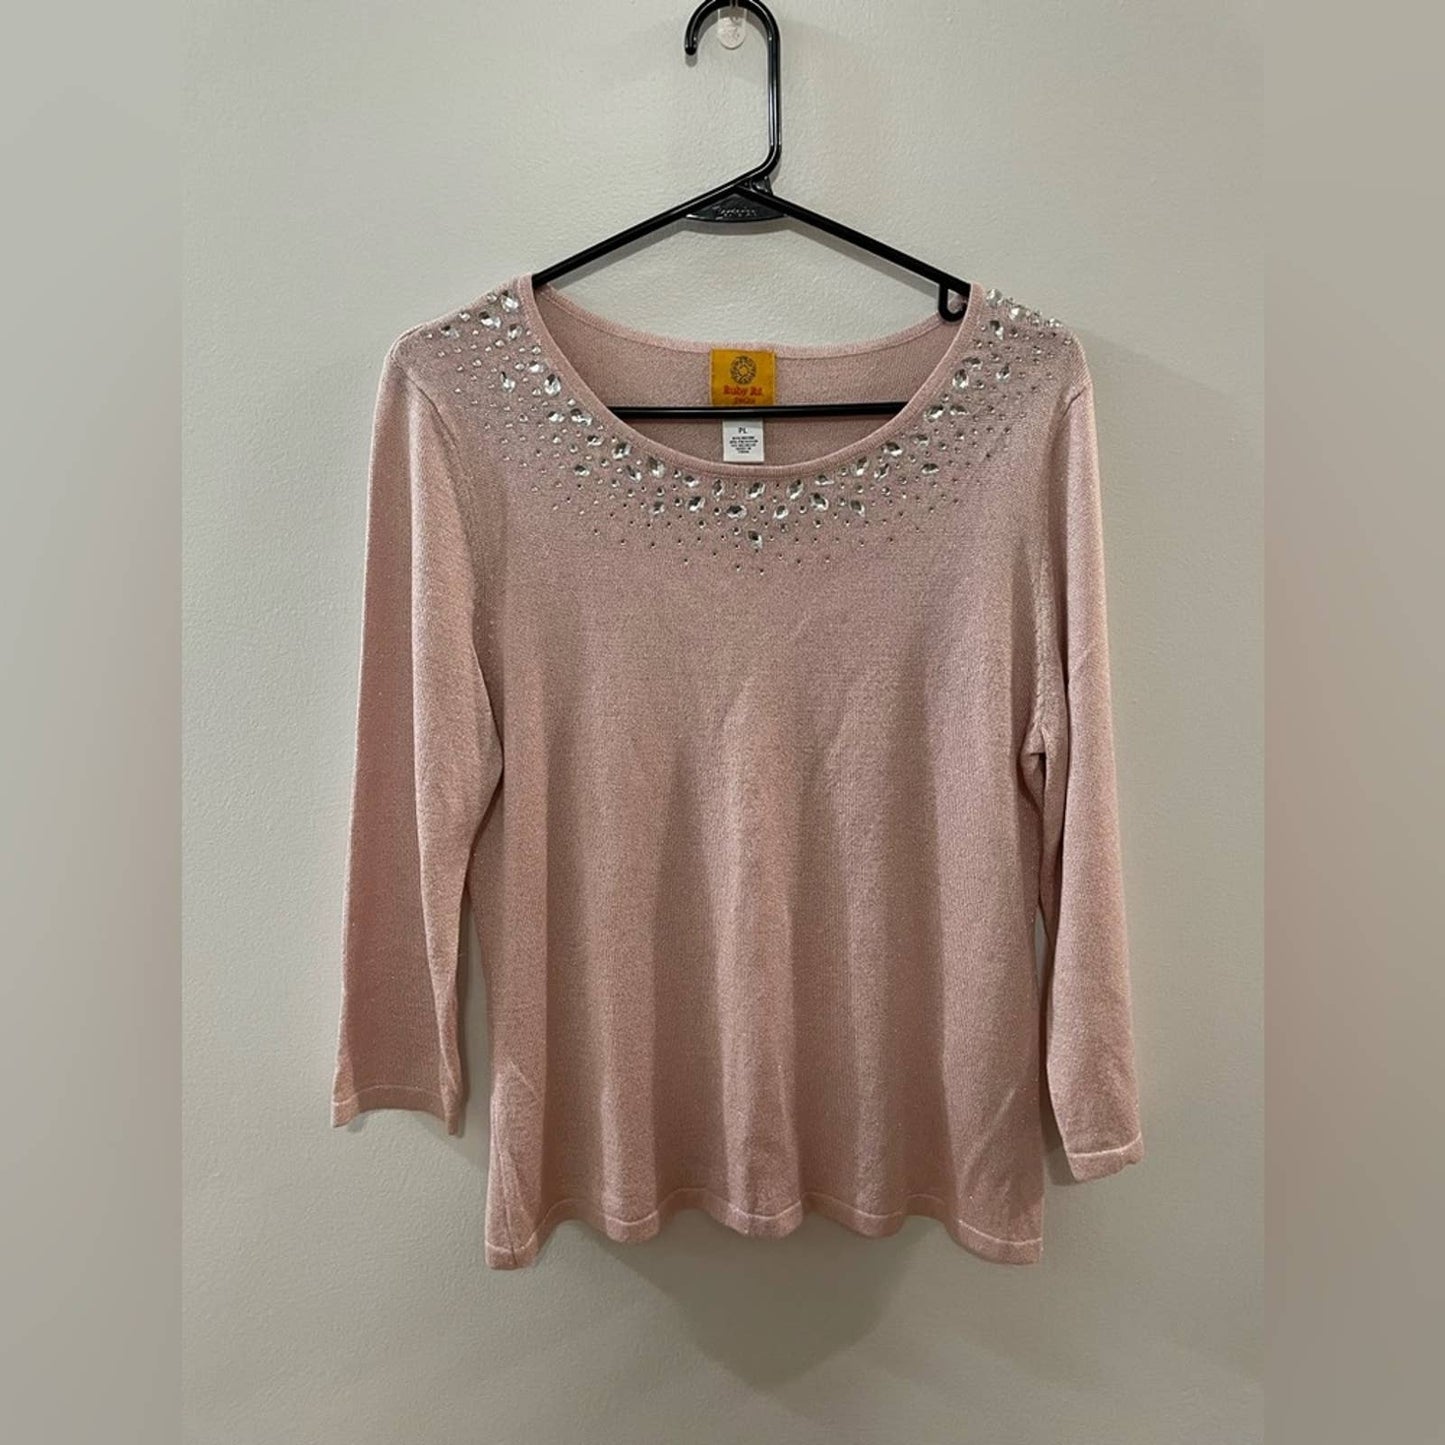 Petite LG Ruby Rd Crystal Shimmer Pink Sweater